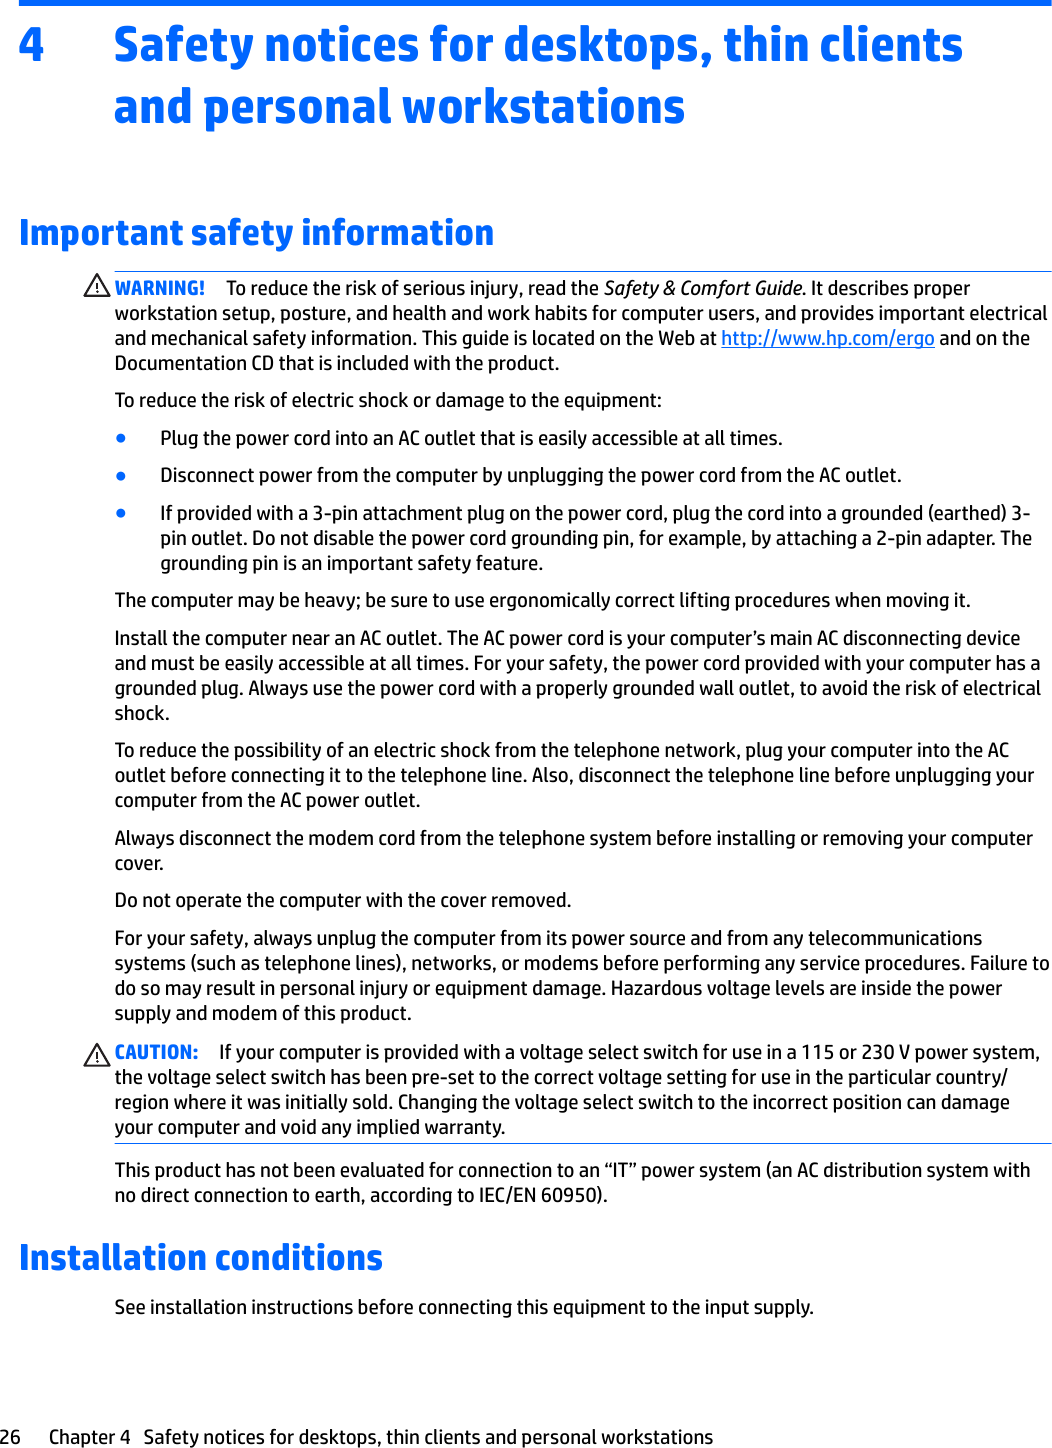 4 Safety notices for desktops, thin clients and personal workstationsImportant safety informationWARNING! To reduce the risk of serious injury, read the Safety &amp; Comfort Guide. It describes proper workstation setup, posture, and health and work habits for computer users, and provides important electrical and mechanical safety information. This guide is located on the Web at http://www.hp.com/ergo and on the Documentation CD that is included with the product.To reduce the risk of electric shock or damage to the equipment:●Plug the power cord into an AC outlet that is easily accessible at all times.●Disconnect power from the computer by unplugging the power cord from the AC outlet.●If provided with a 3-pin attachment plug on the power cord, plug the cord into a grounded (earthed) 3-pin outlet. Do not disable the power cord grounding pin, for example, by attaching a 2-pin adapter. The grounding pin is an important safety feature.The computer may be heavy; be sure to use ergonomically correct lifting procedures when moving it.Install the computer near an AC outlet. The AC power cord is your computer’s main AC disconnecting device and must be easily accessible at all times. For your safety, the power cord provided with your computer has a grounded plug. Always use the power cord with a properly grounded wall outlet, to avoid the risk of electrical shock.To reduce the possibility of an electric shock from the telephone network, plug your computer into the AC outlet before connecting it to the telephone line. Also, disconnect the telephone line before unplugging your computer from the AC power outlet.Always disconnect the modem cord from the telephone system before installing or removing your computer cover.Do not operate the computer with the cover removed.For your safety, always unplug the computer from its power source and from any telecommunications systems (such as telephone lines), networks, or modems before performing any service procedures. Failure to do so may result in personal injury or equipment damage. Hazardous voltage levels are inside the power supply and modem of this product.CAUTION: If your computer is provided with a voltage select switch for use in a 115 or 230 V power system, the voltage select switch has been pre-set to the correct voltage setting for use in the particular country/region where it was initially sold. Changing the voltage select switch to the incorrect position can damage your computer and void any implied warranty.This product has not been evaluated for connection to an “IT” power system (an AC distribution system with no direct connection to earth, according to IEC/EN 60950).Installation conditionsSee installation instructions before connecting this equipment to the input supply.26 Chapter 4   Safety notices for desktops, thin clients and personal workstations